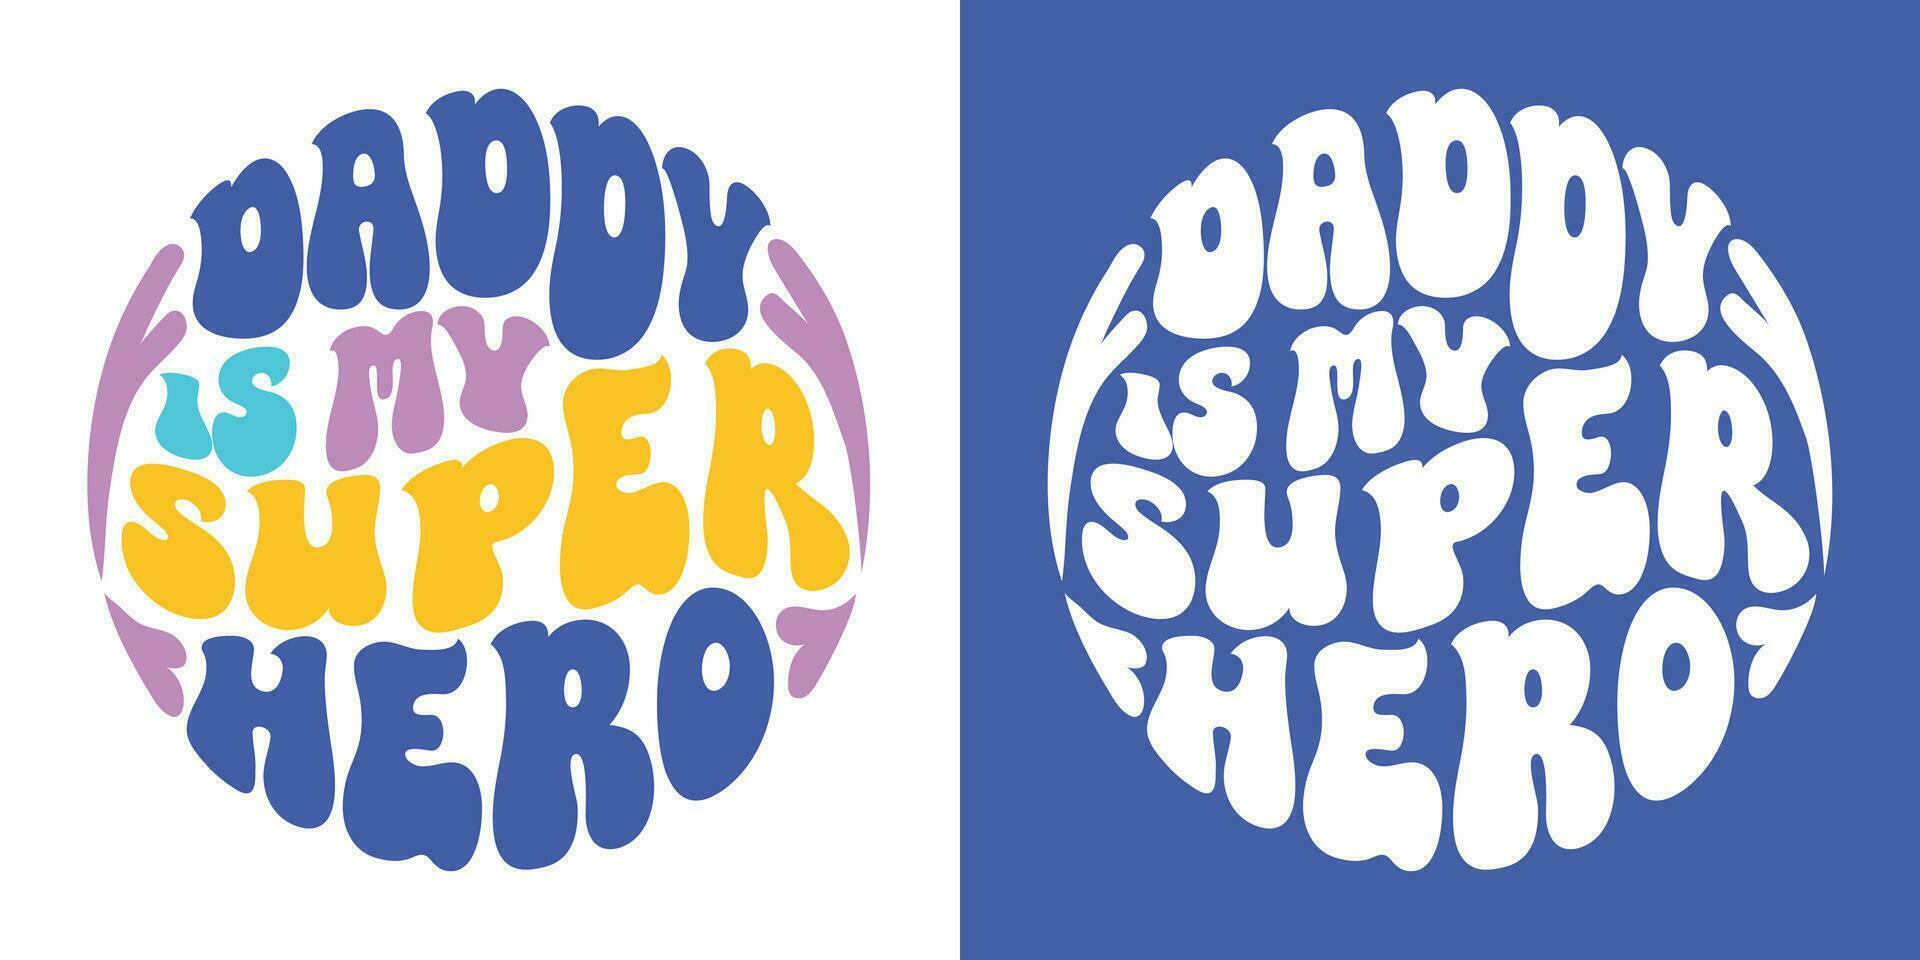 Retro groovy lettering-Daddy is my super hero. Retro slogan in round shape. Colourful trendy print design for posters, cards, T-shirts in hippie style 60s, 70s. vector